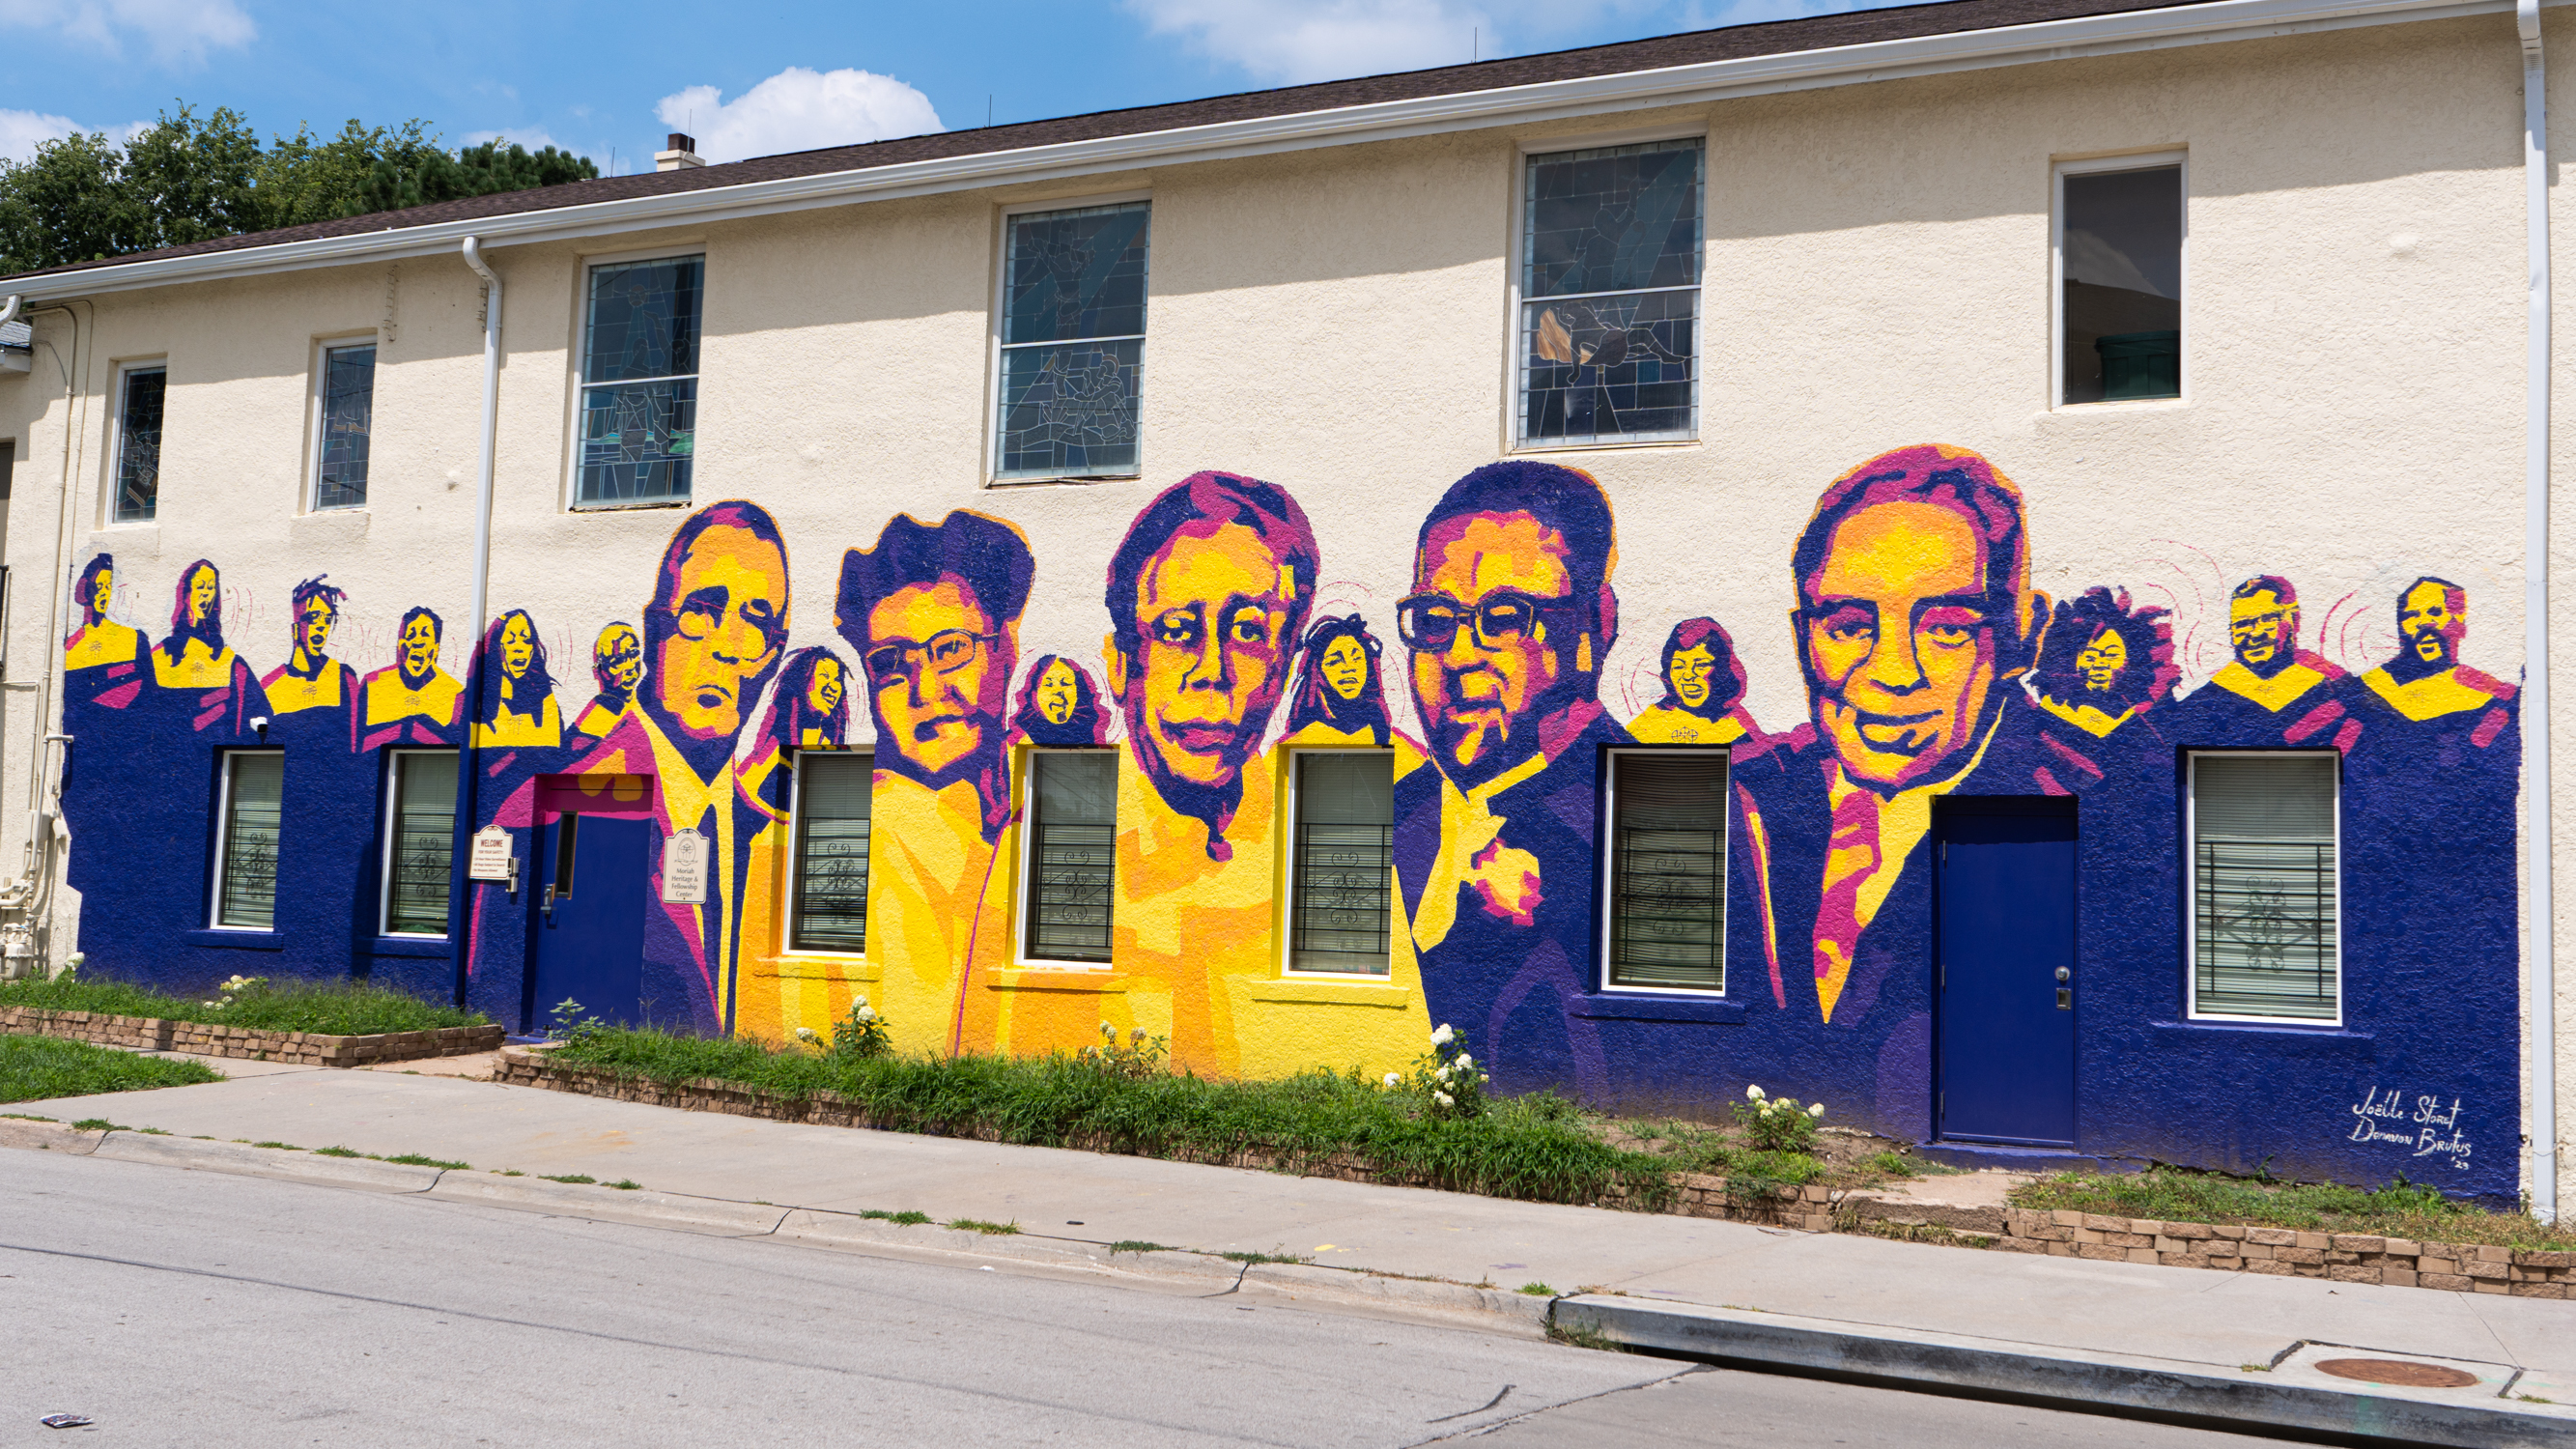 A view from the street of a multicolor mural of church leaders and choir memebers on the side of Mount Moriah Church